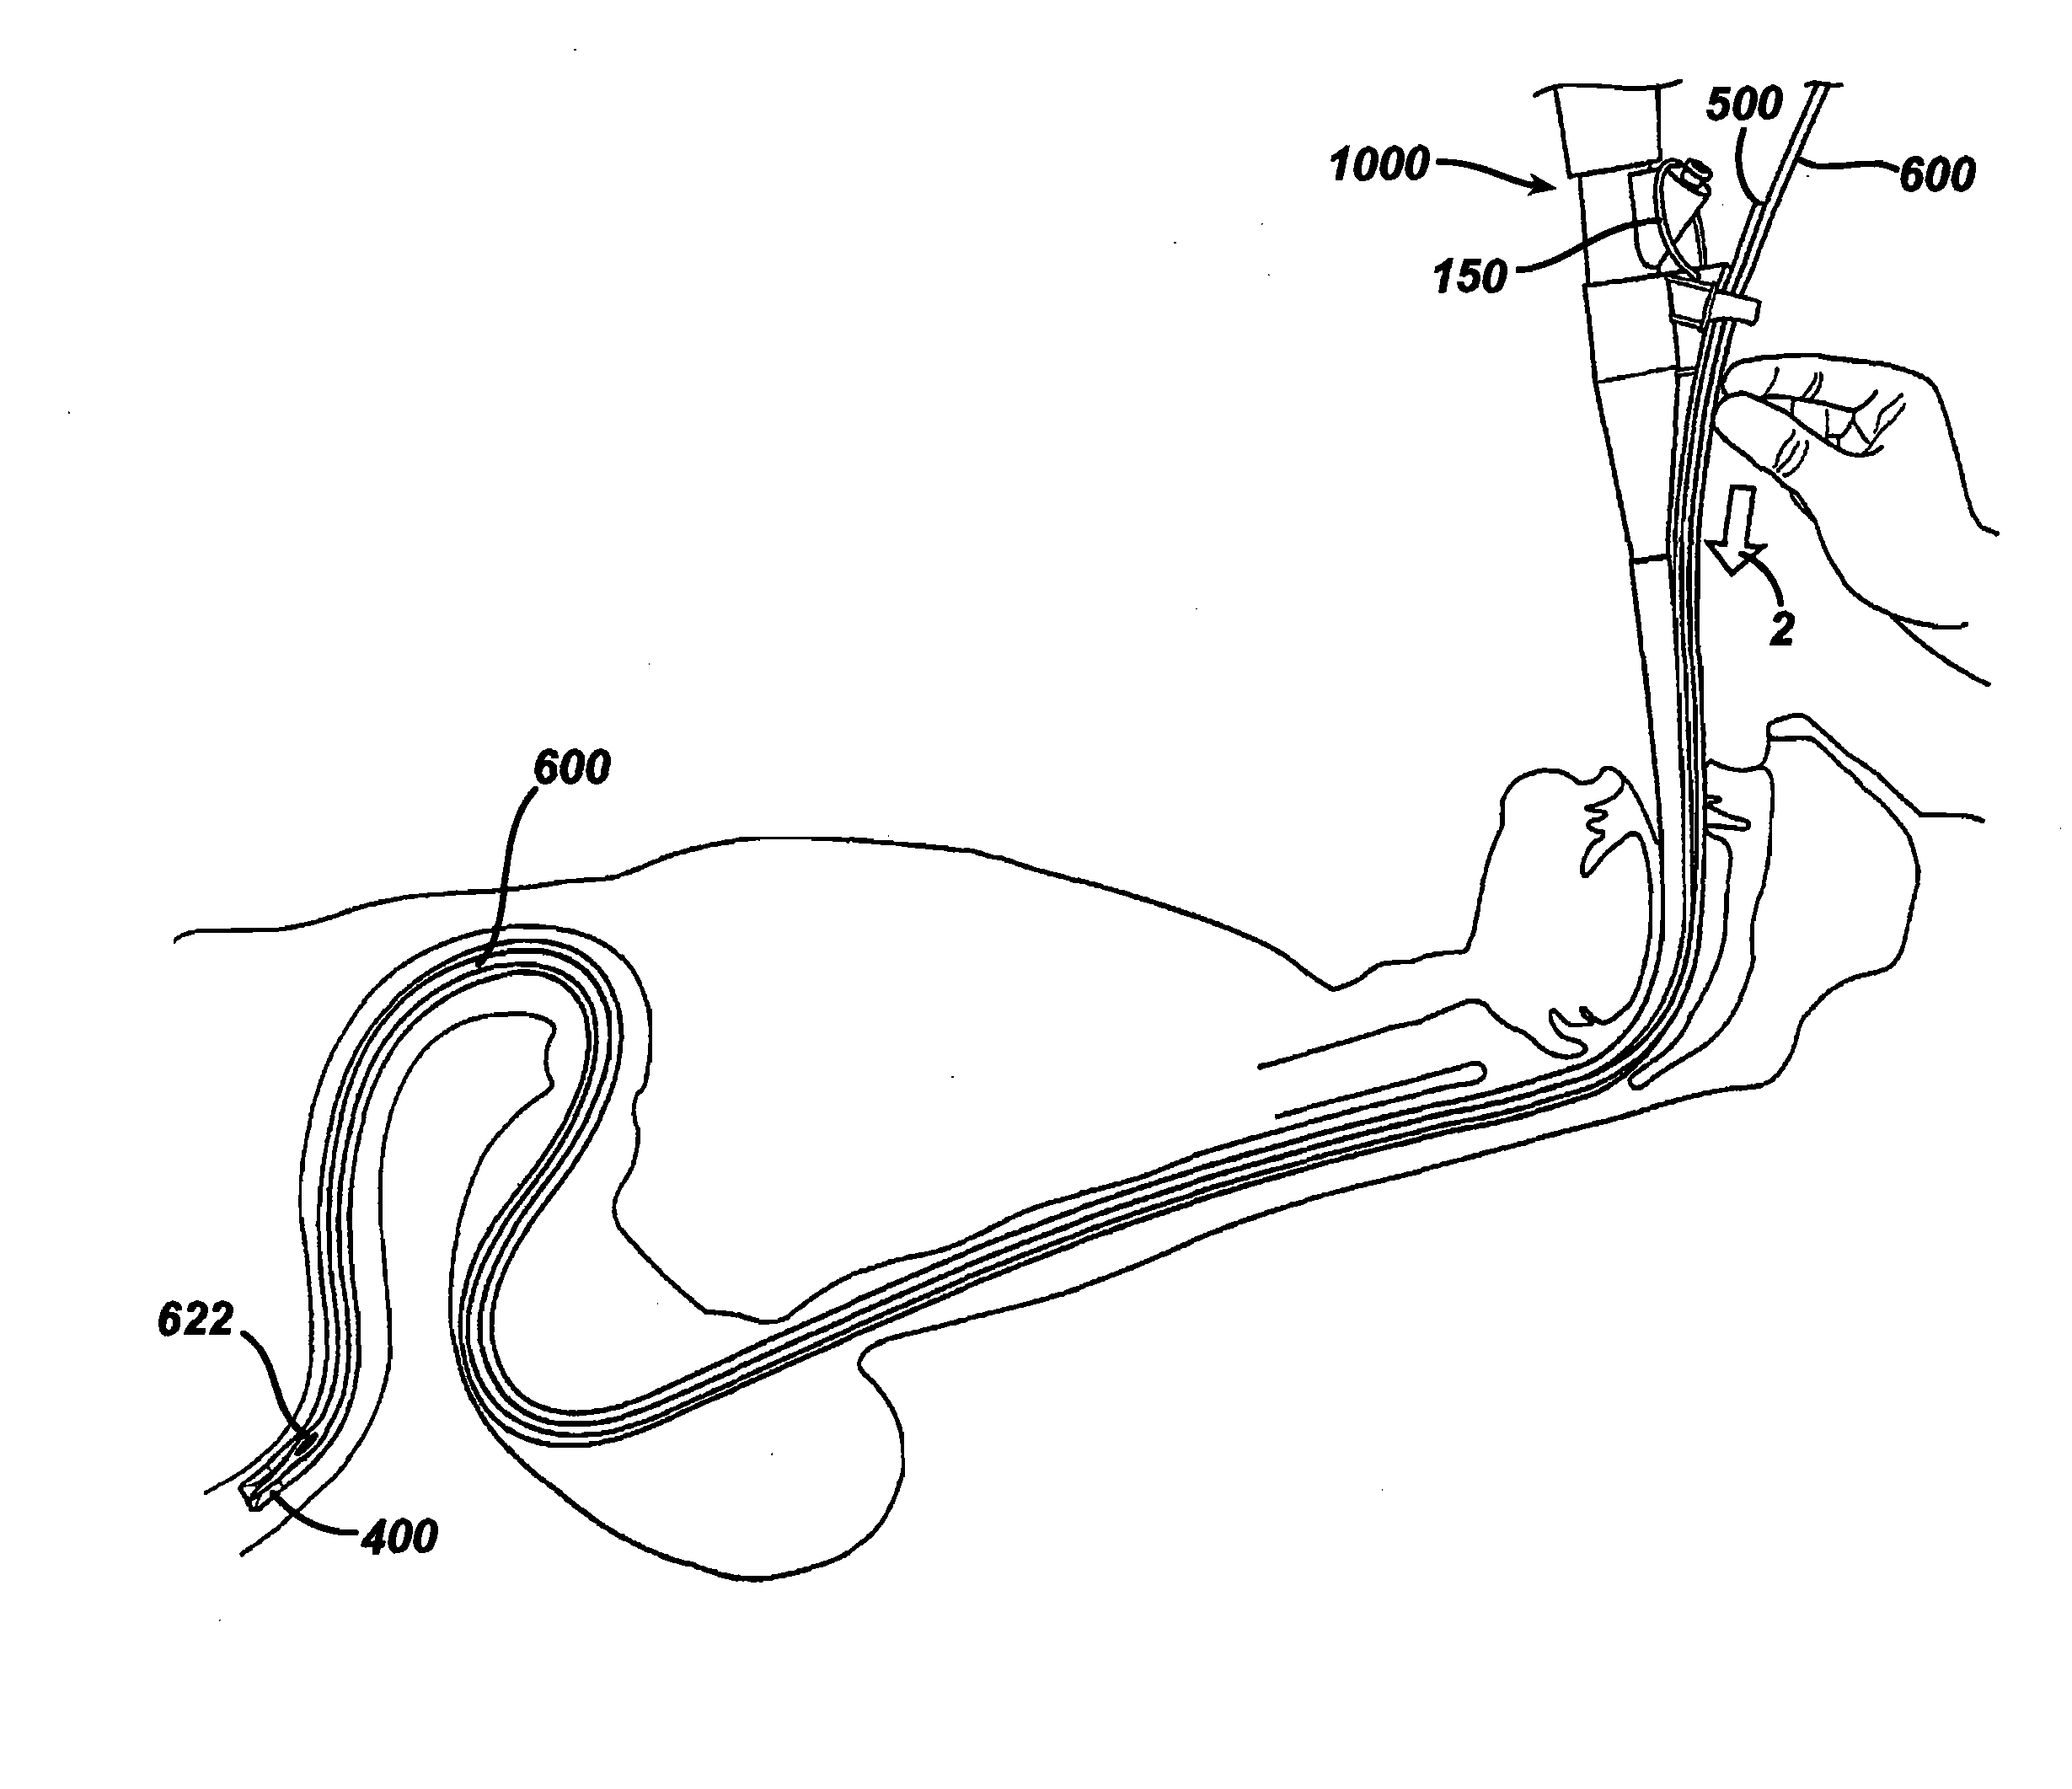 Method for deploying a medical device